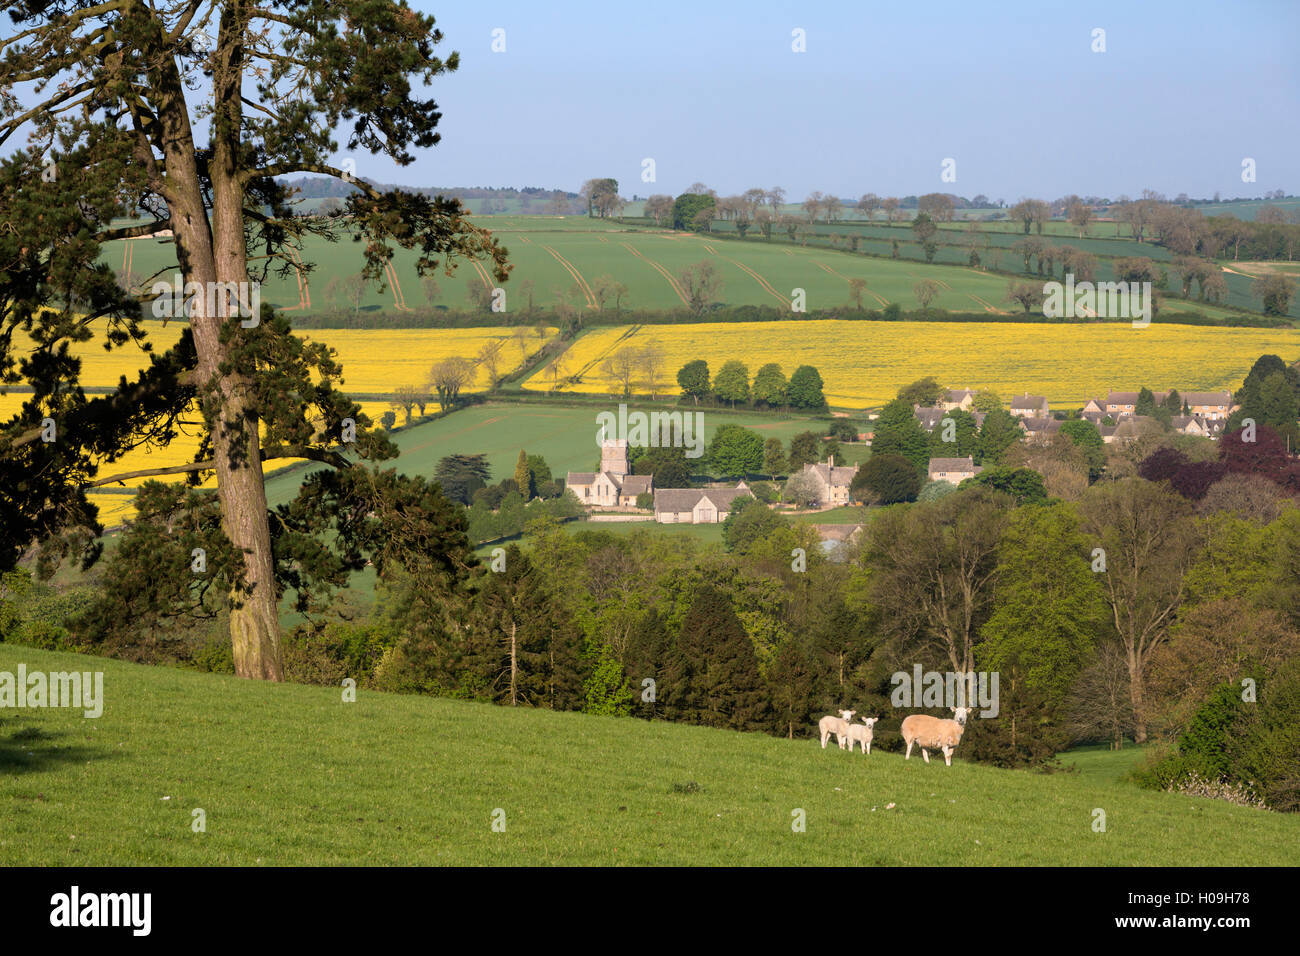 Oilseed rape fields and sheep above Cotswold village, Guiting Power, Cotswolds, Gloucestershire, England, United Kingdom, Europe Stock Photo